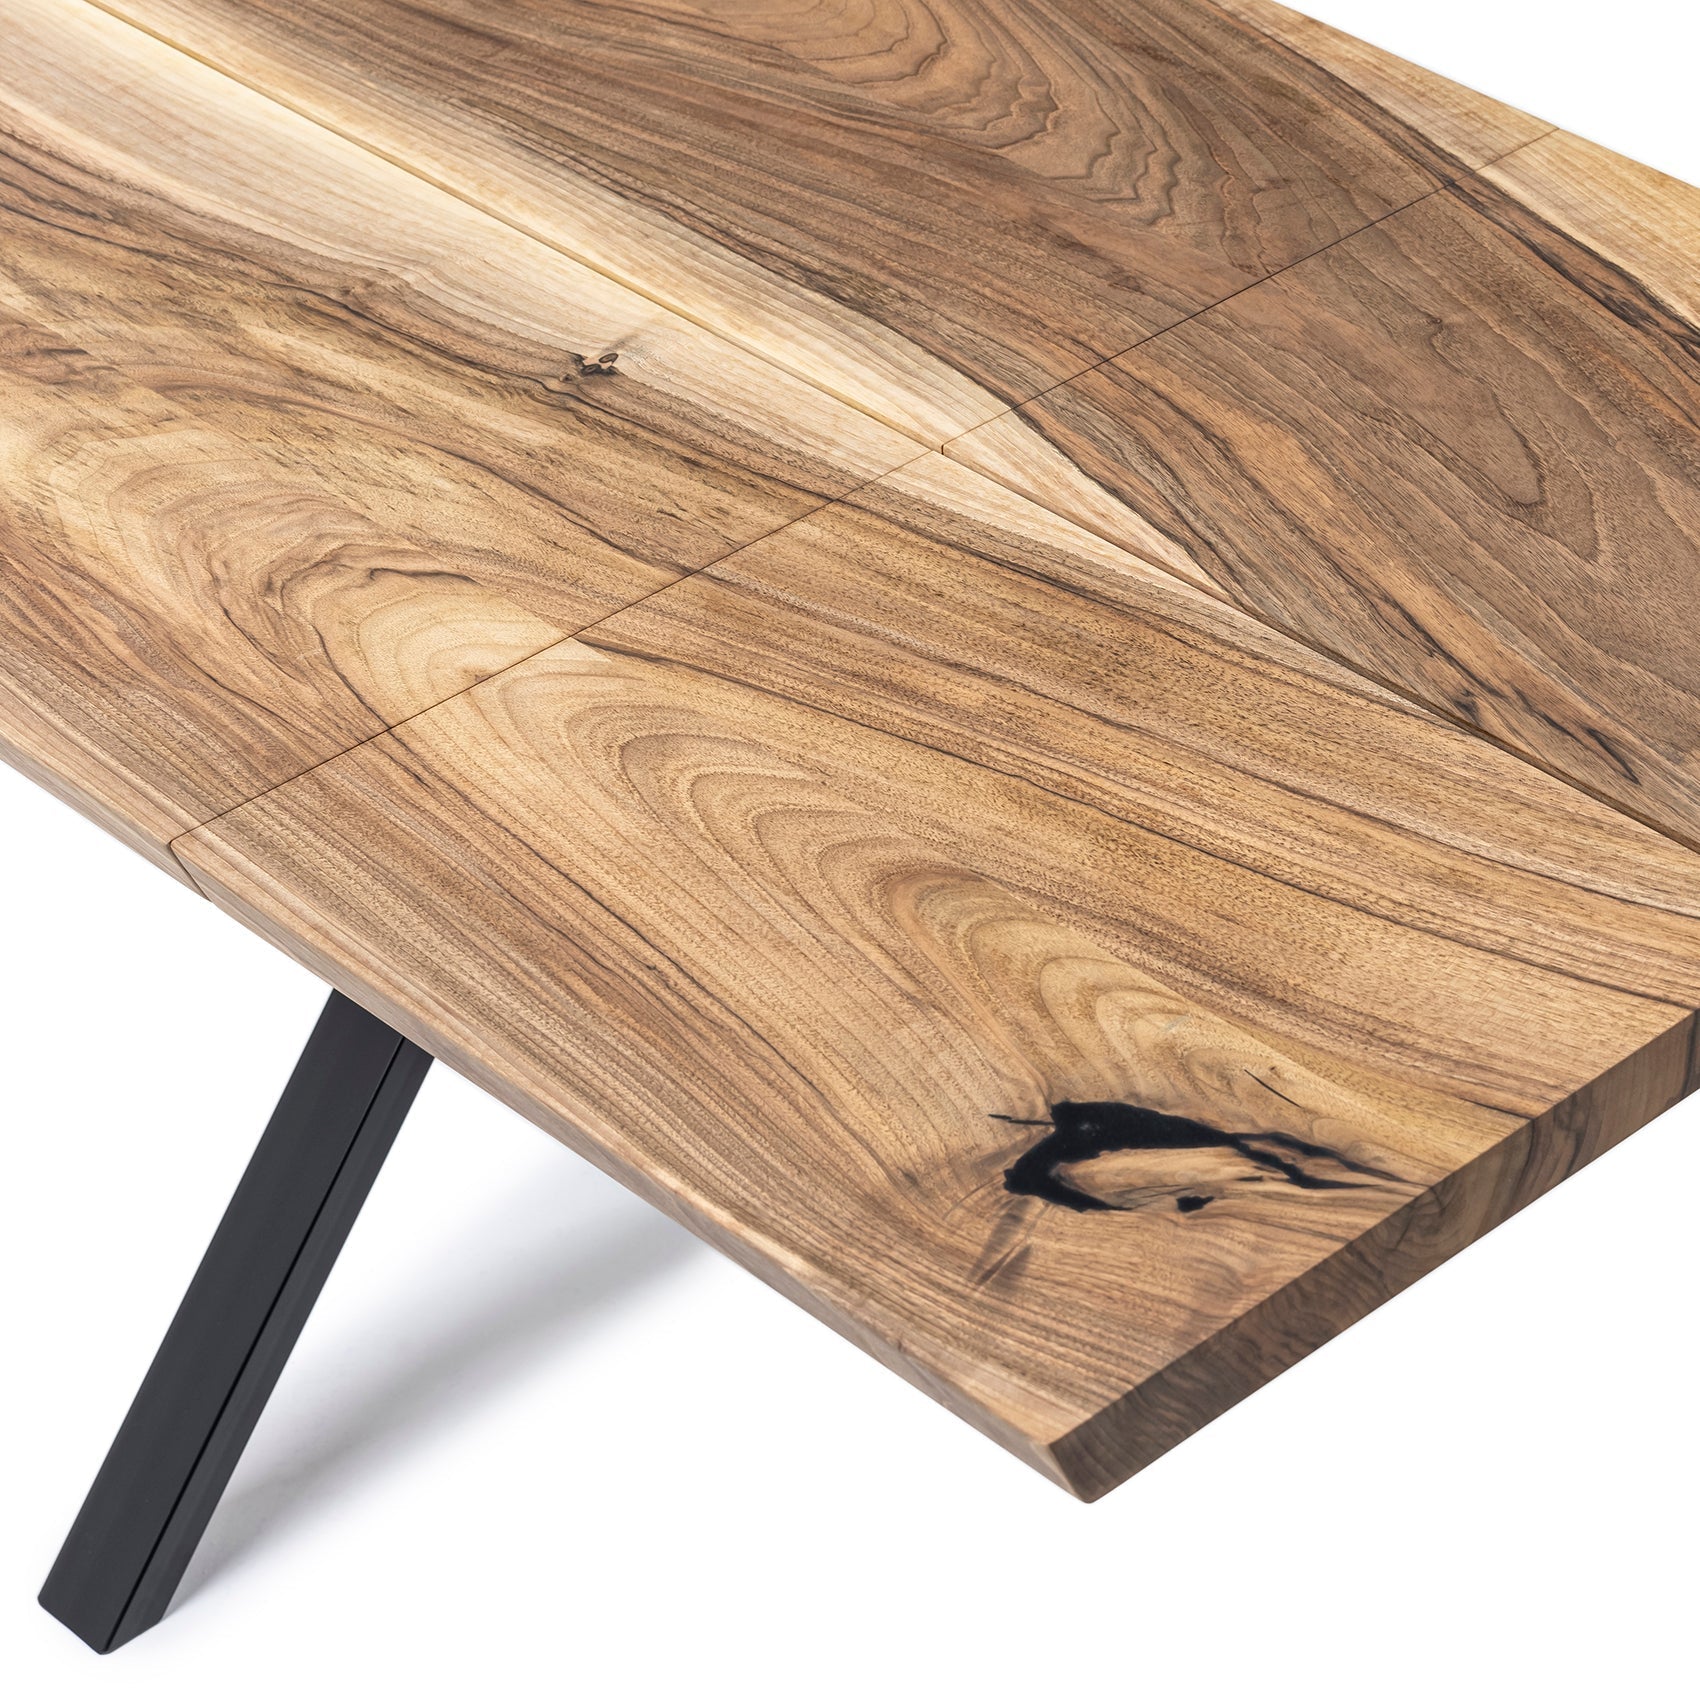 Natural Walnut Office Table - S10Home